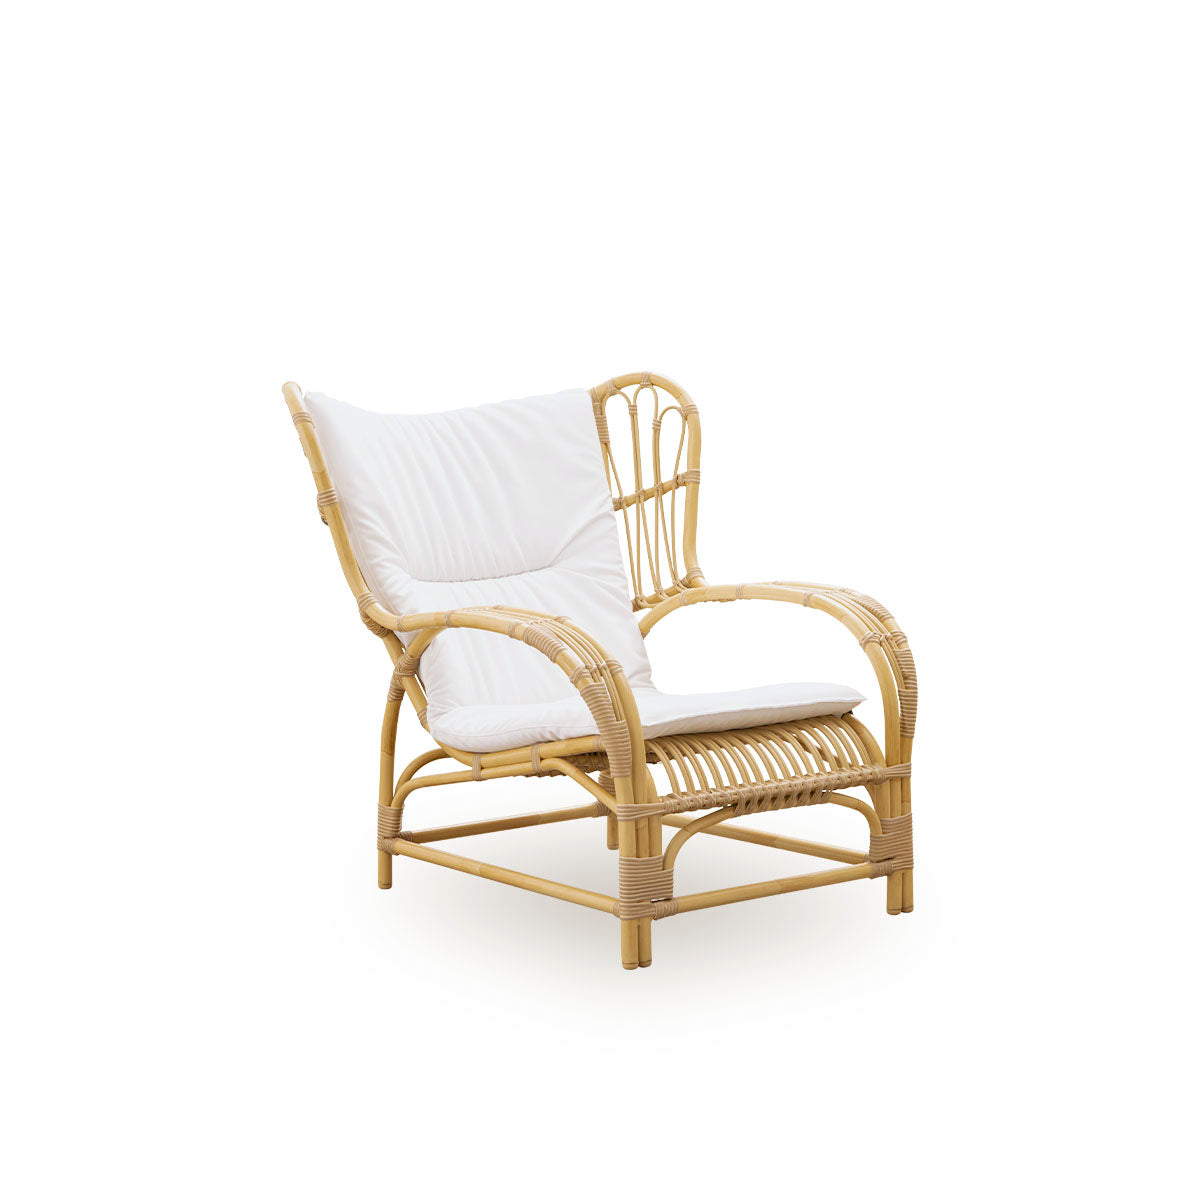 Product shot of Teddy Lounge Chair Outdoor with cushion by Sikka Design